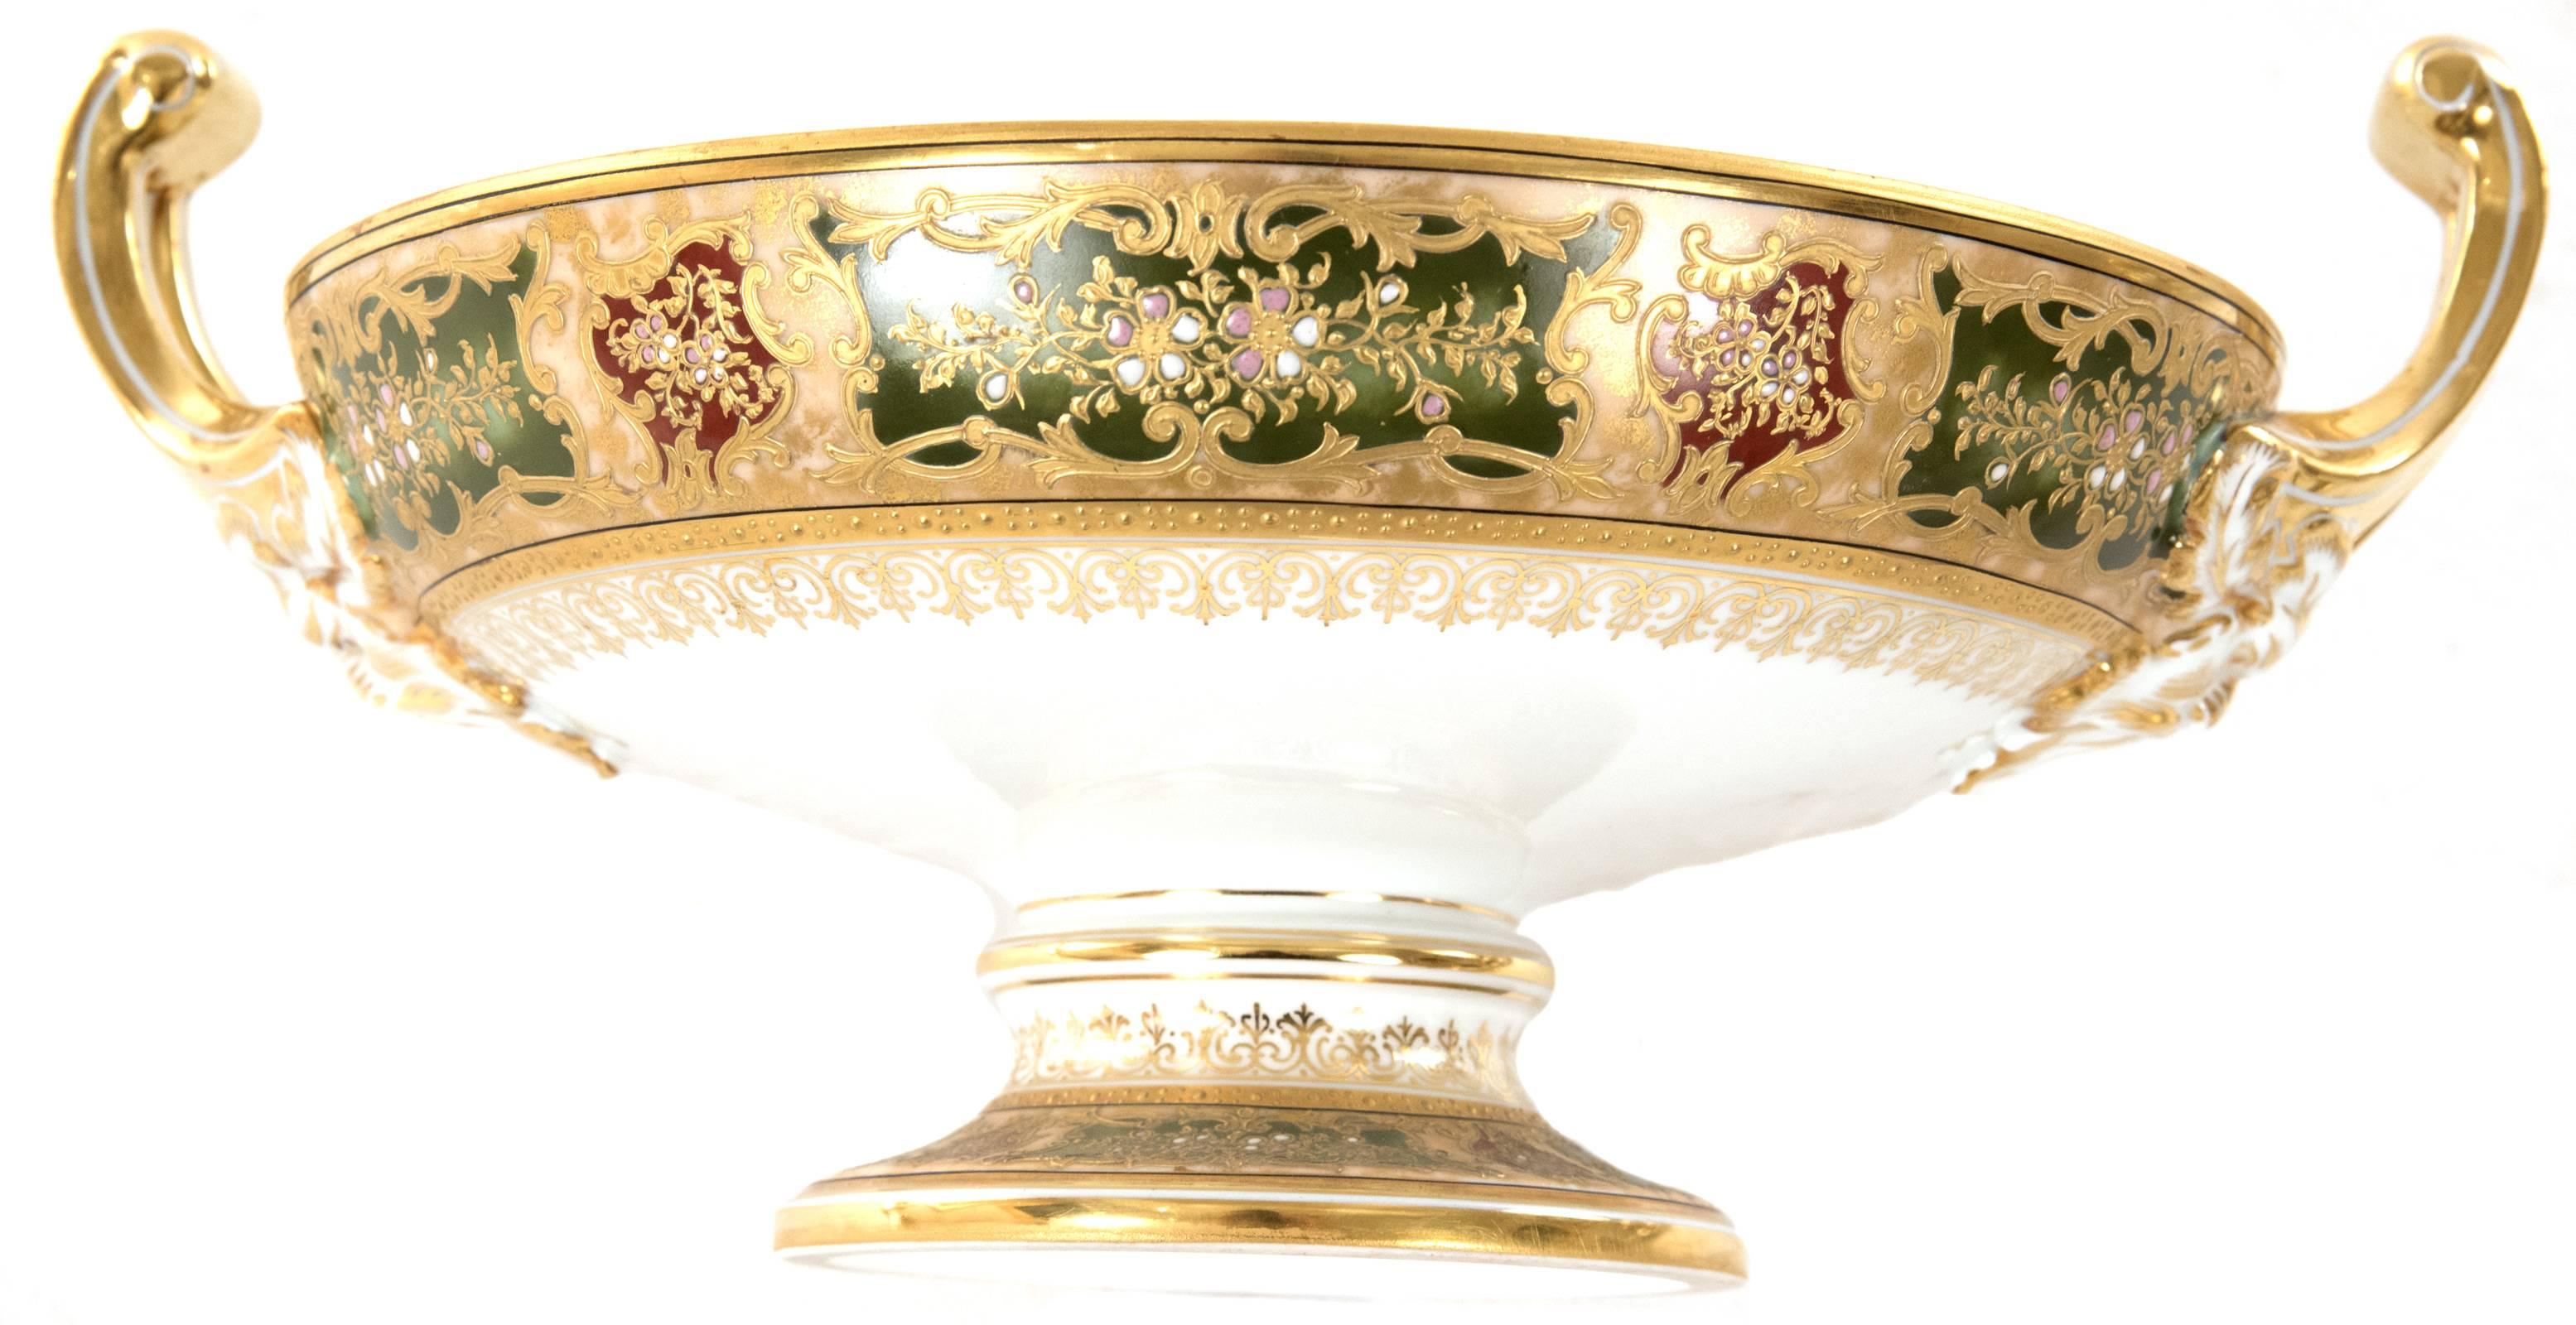 Beautifully painted and luxuriously gilt, this set includes ten serving dishes, two large lidded tureens with chargers, a serving bowl and a pouring dish. The set was made in Vienna during the last quarter of the 19th century by the prestigious